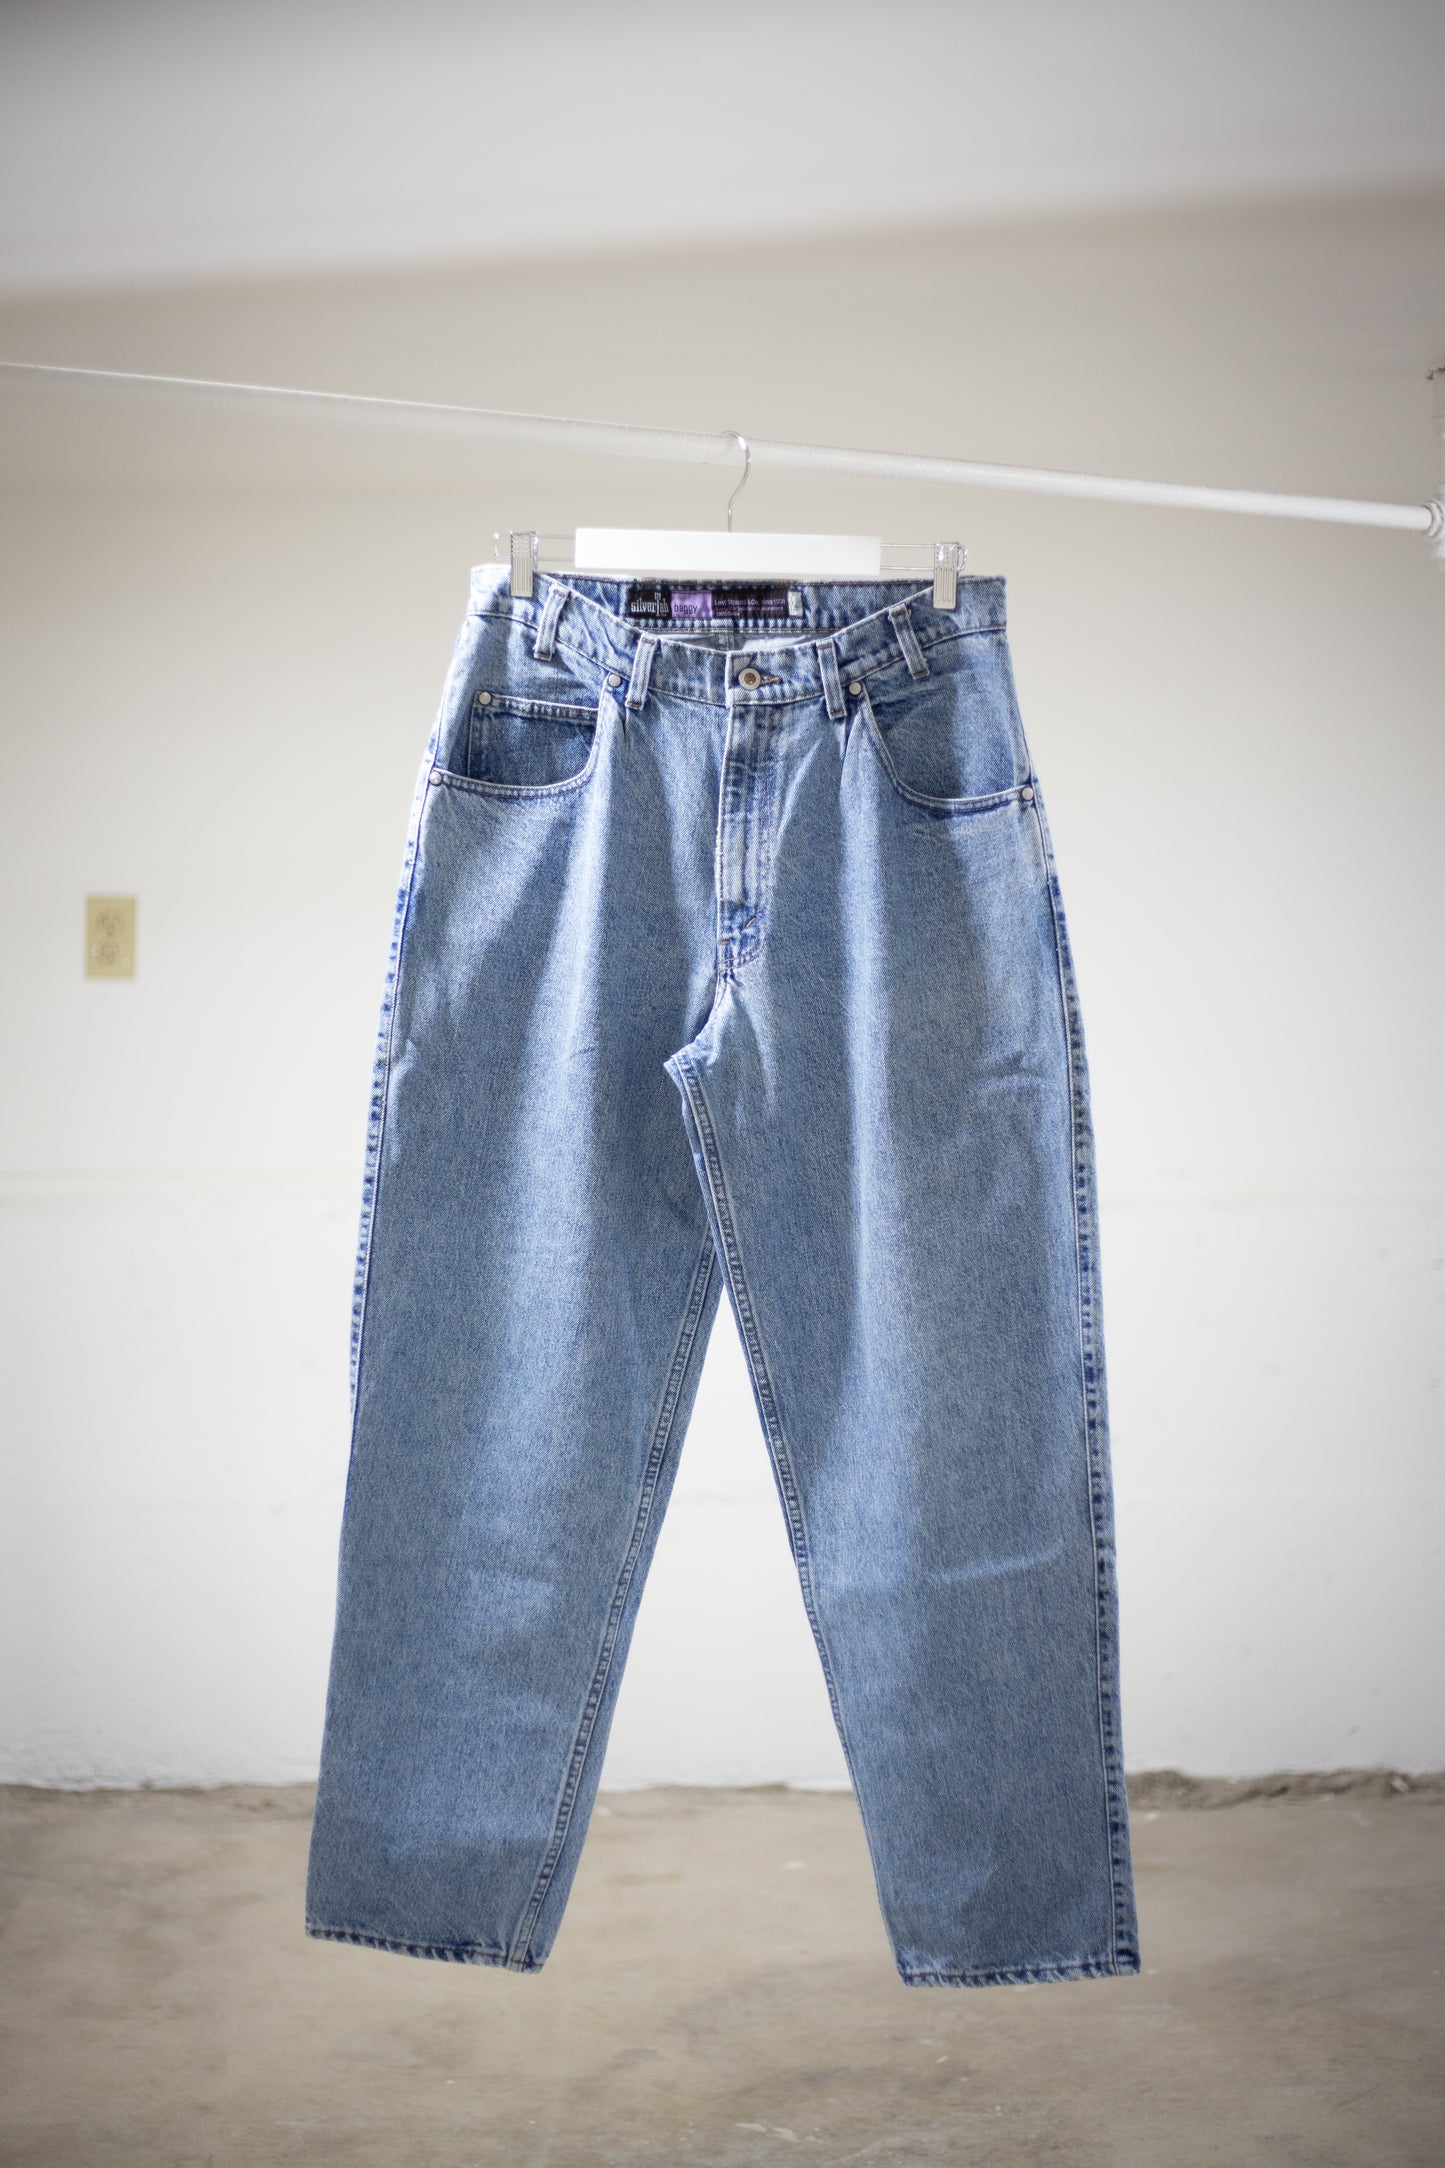 90's Levi's SilverTab (954 0593) Baggy Jeans